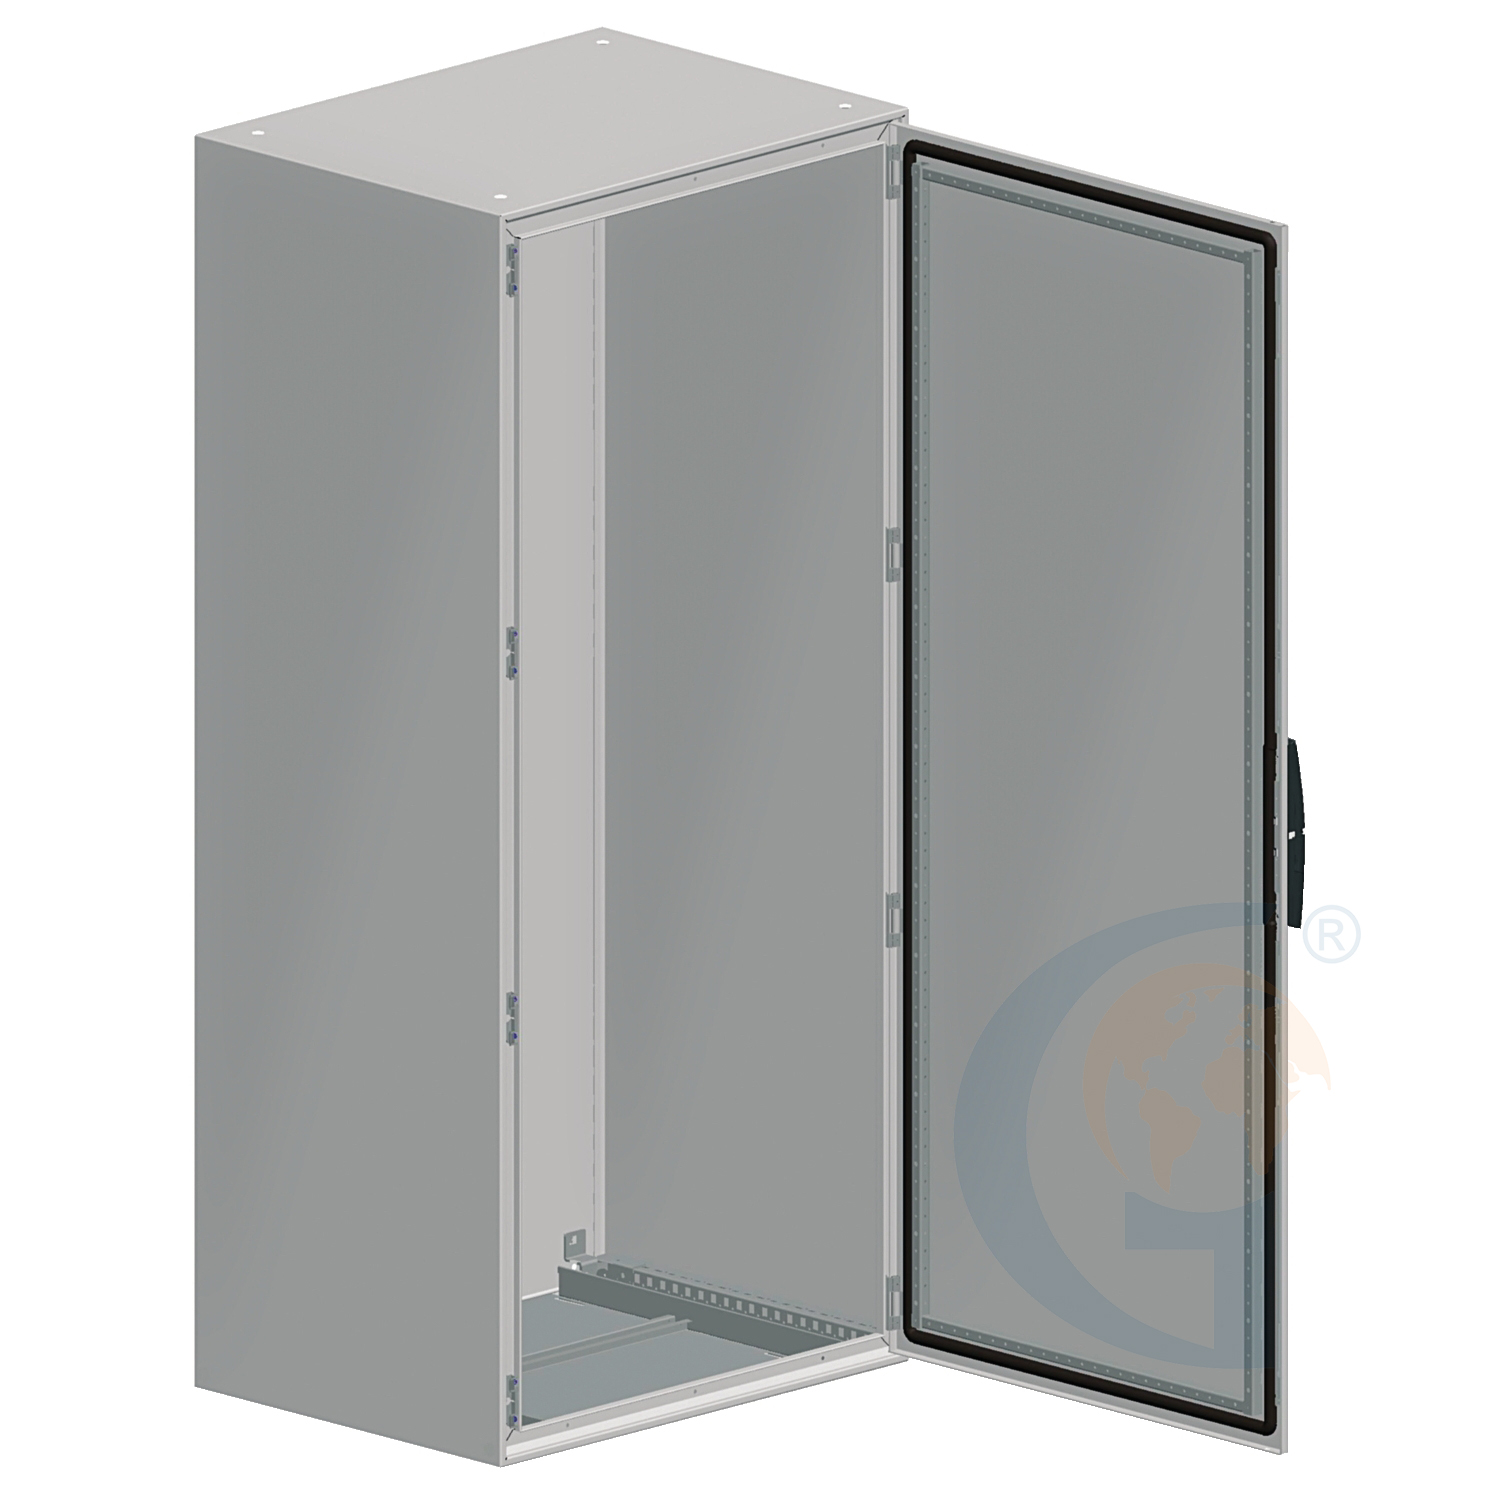 Schneider Electric NSYSM18630P SPACIAL SM COMPACT ENCLOSURE WITH MOUNTING PLATE – 1800X600X300 MM https://gesrepair.com/wp-content/uploads/2020/Schneider/Schneider_Electric_NSYSM18630P_.jpg